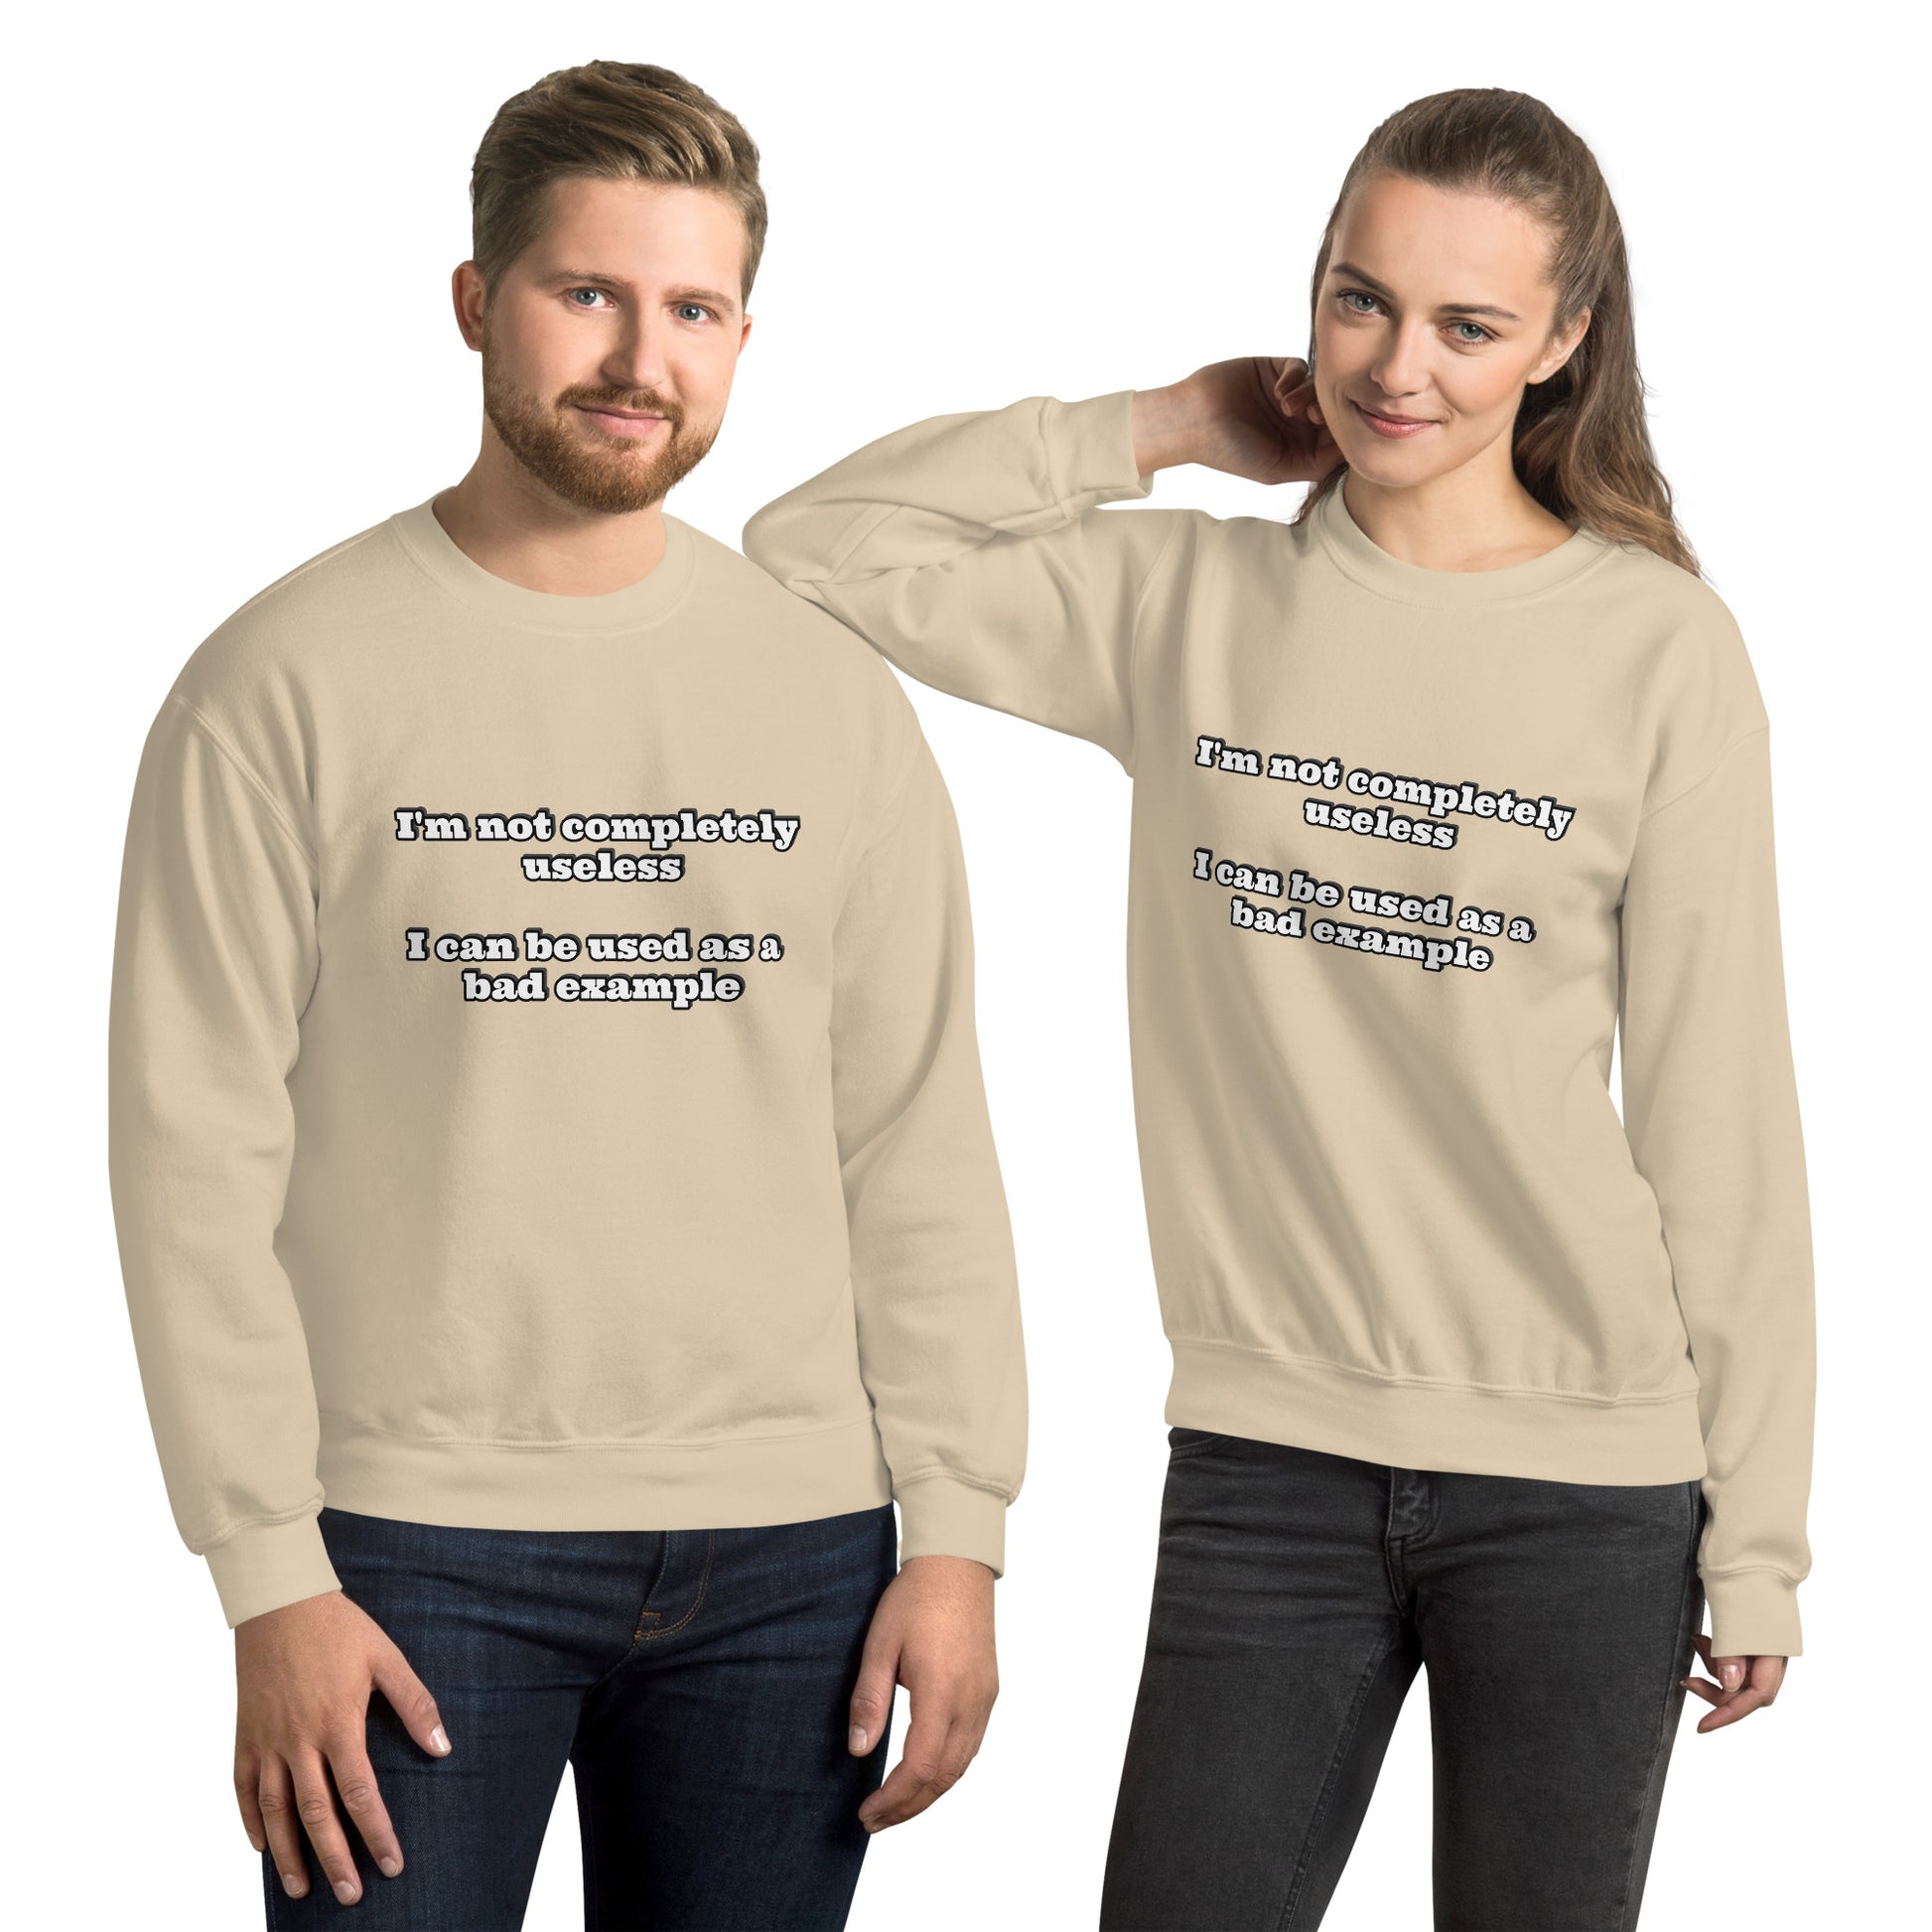 Man and women with sand sweatshirt with text “I'm not completely useless I can be used as a bad example”